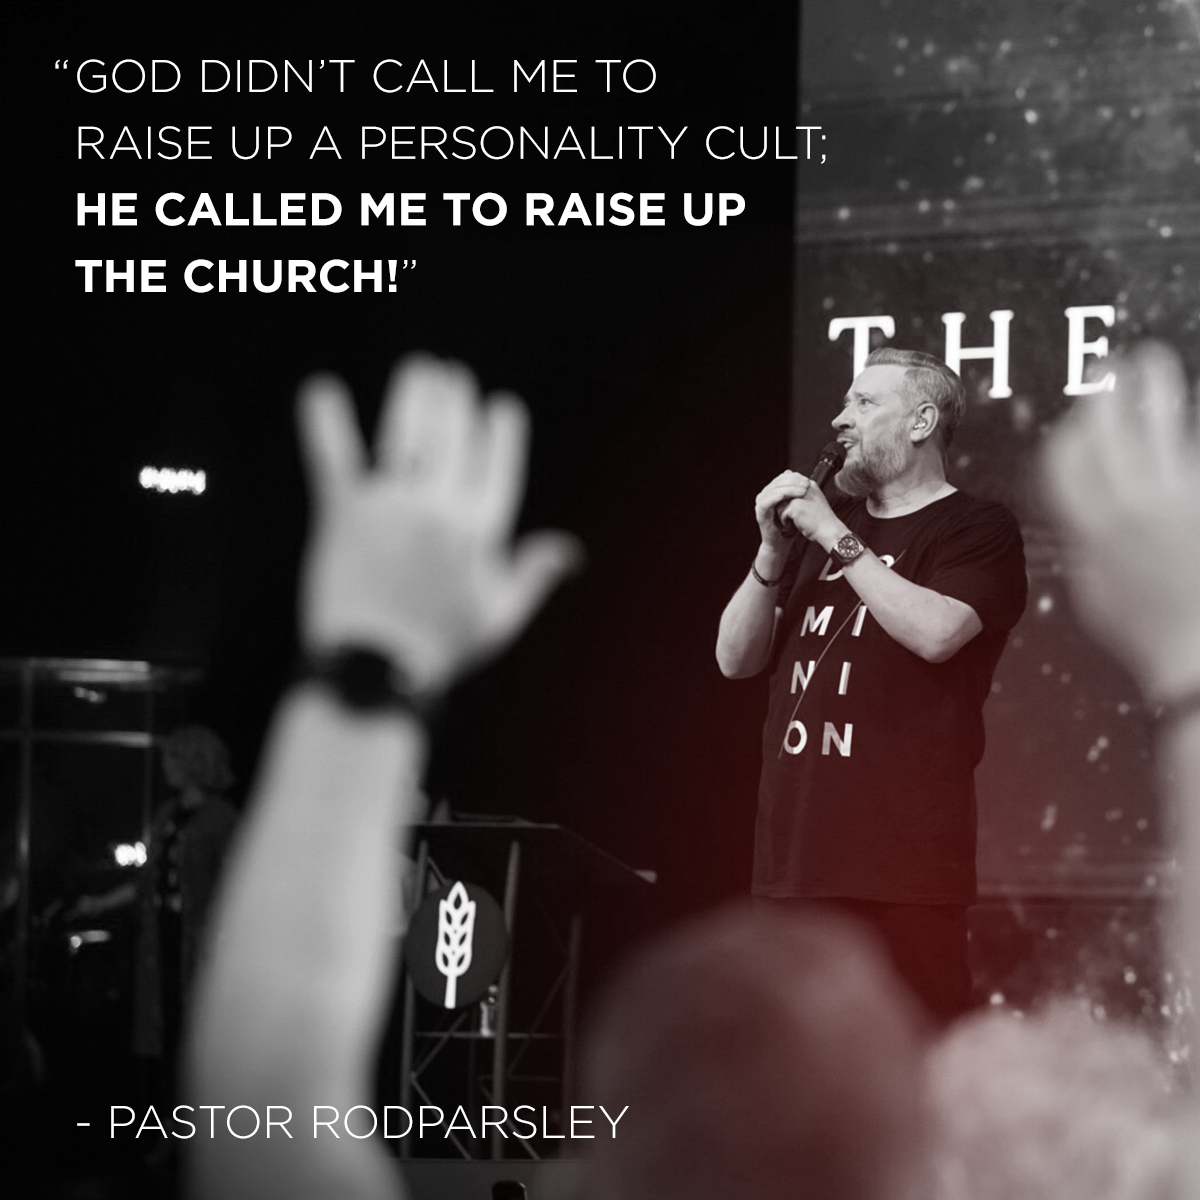 “God didn’t call me to raise up a personality cult; He called me to raise up the church!” – Pastor Rod Parsley